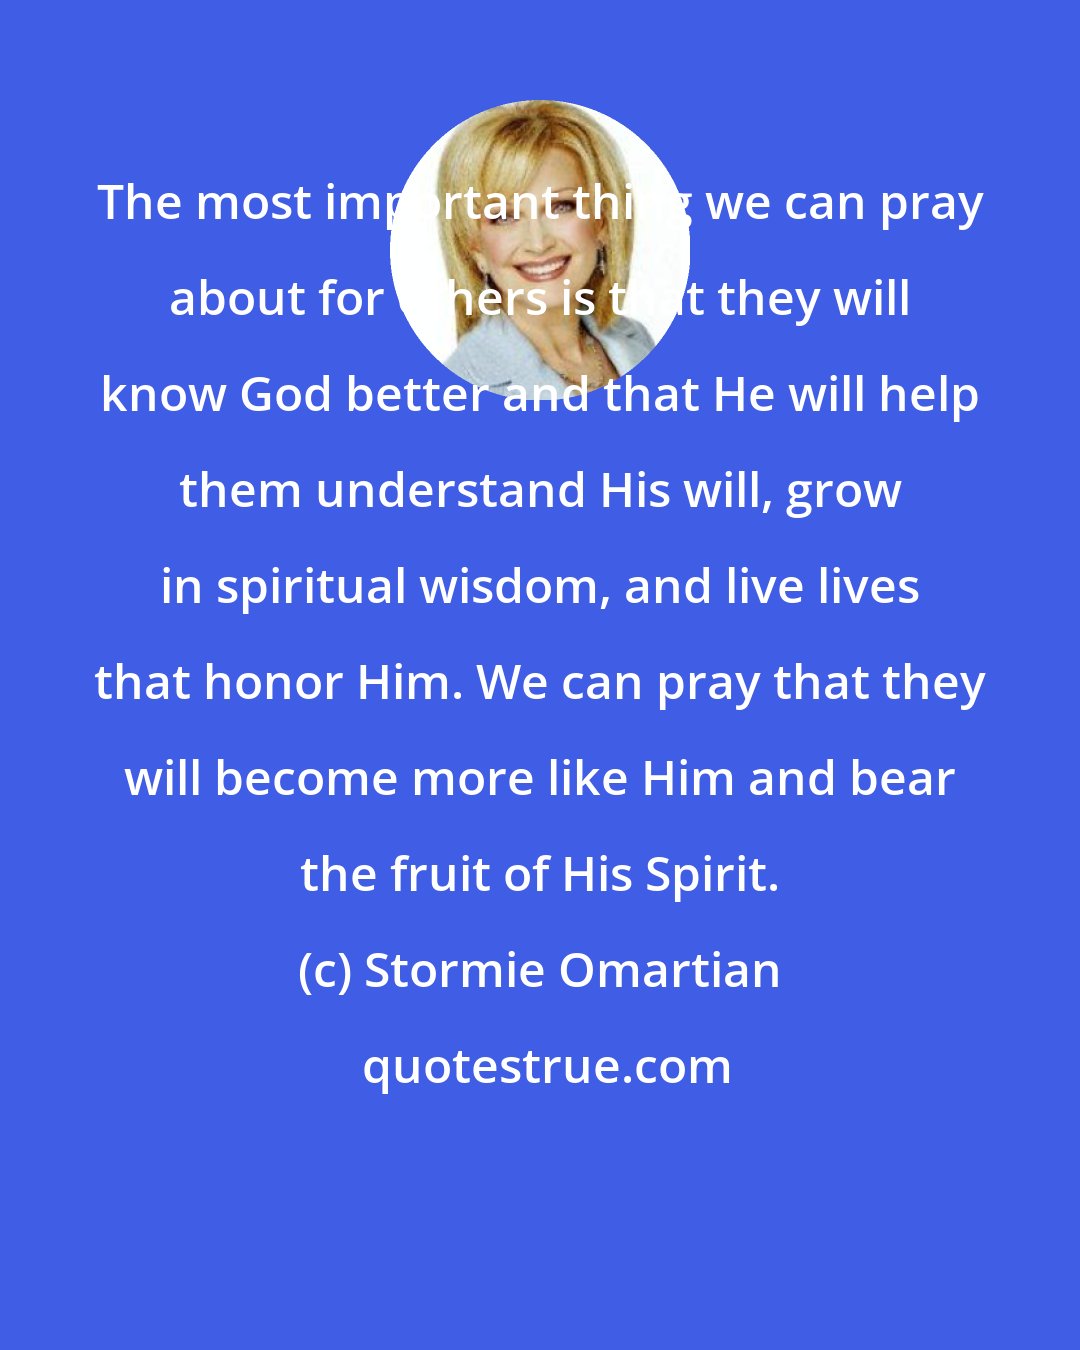 Stormie Omartian: The most important thing we can pray about for others is that they will know God better and that He will help them understand His will, grow in spiritual wisdom, and live lives that honor Him. We can pray that they will become more like Him and bear the fruit of His Spirit.